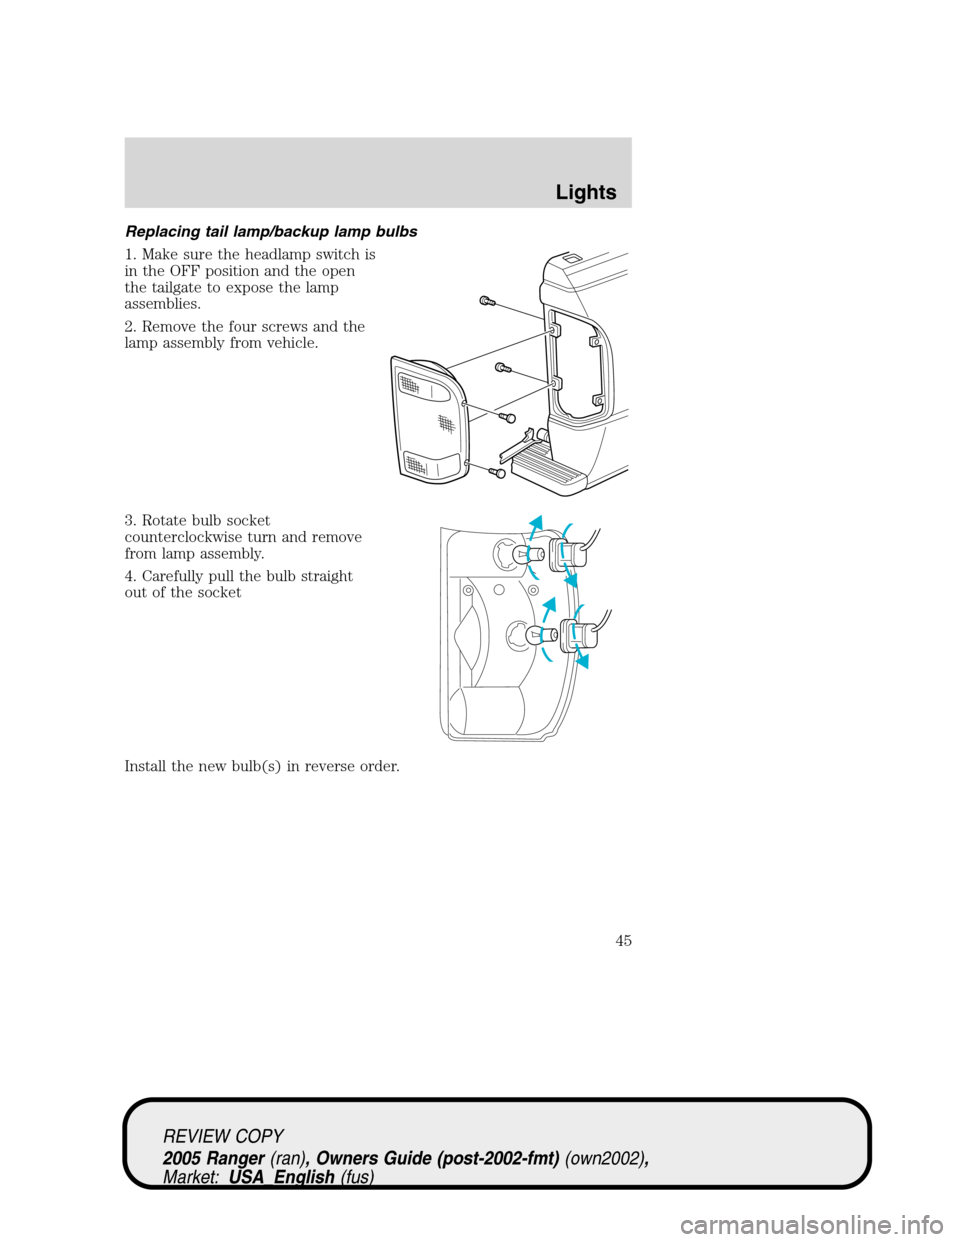 FORD RANGER 2005 2.G Owners Manual Replacing tail lamp/backup lamp bulbs
1. Make sure the headlamp switch is
in the OFF position and the open
the tailgate to expose the lamp
assemblies.
2. Remove the four screws and the
lamp assembly f